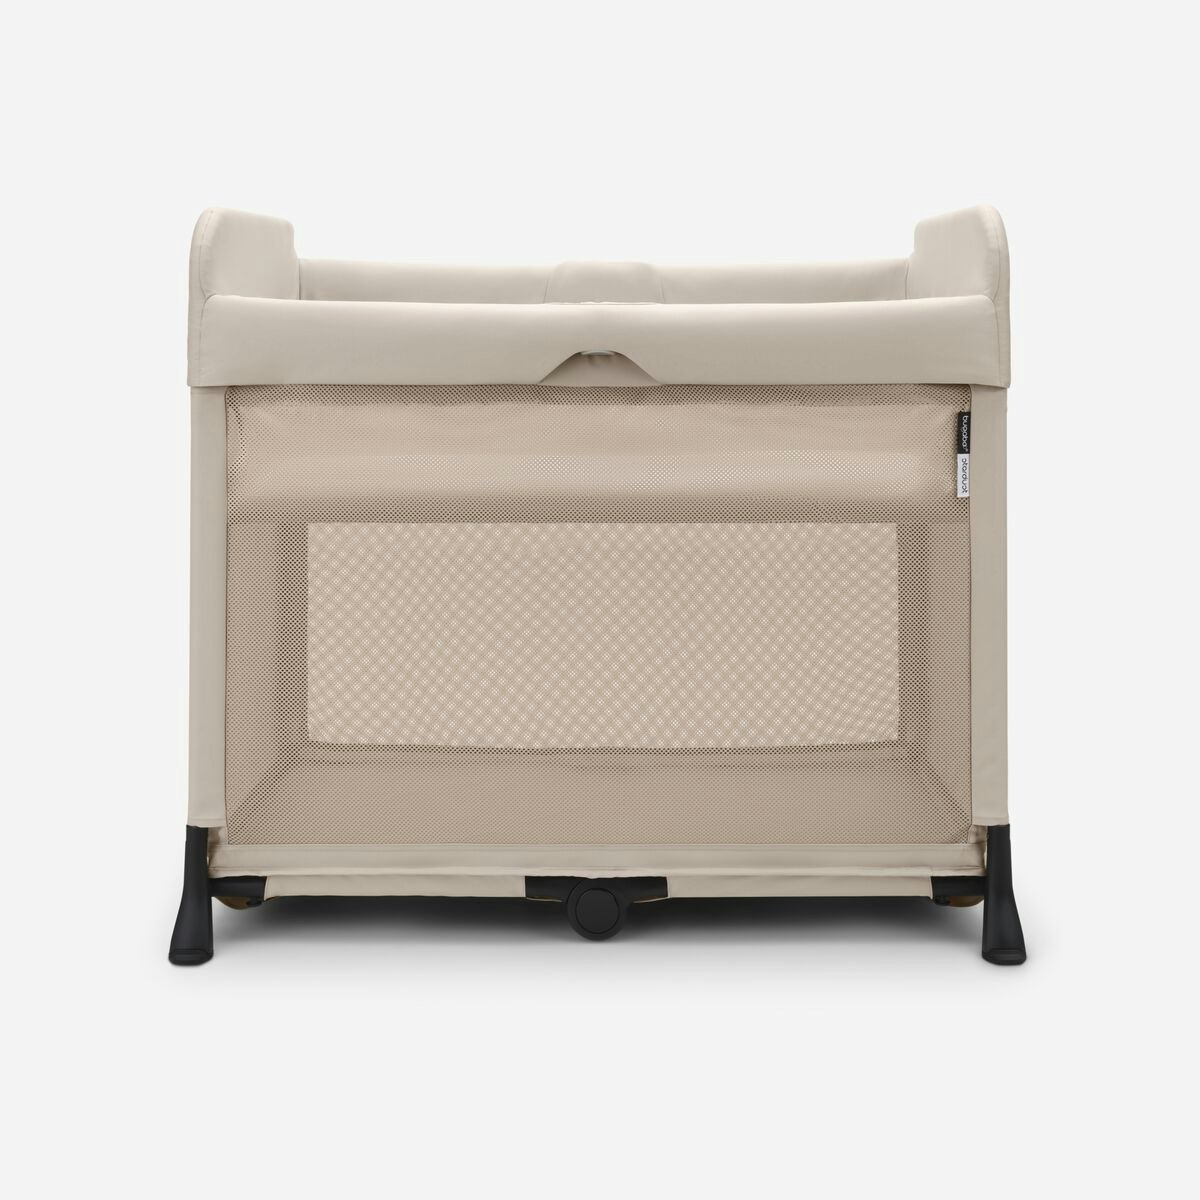 Resesäng Taupe Stardust - Bugaboo